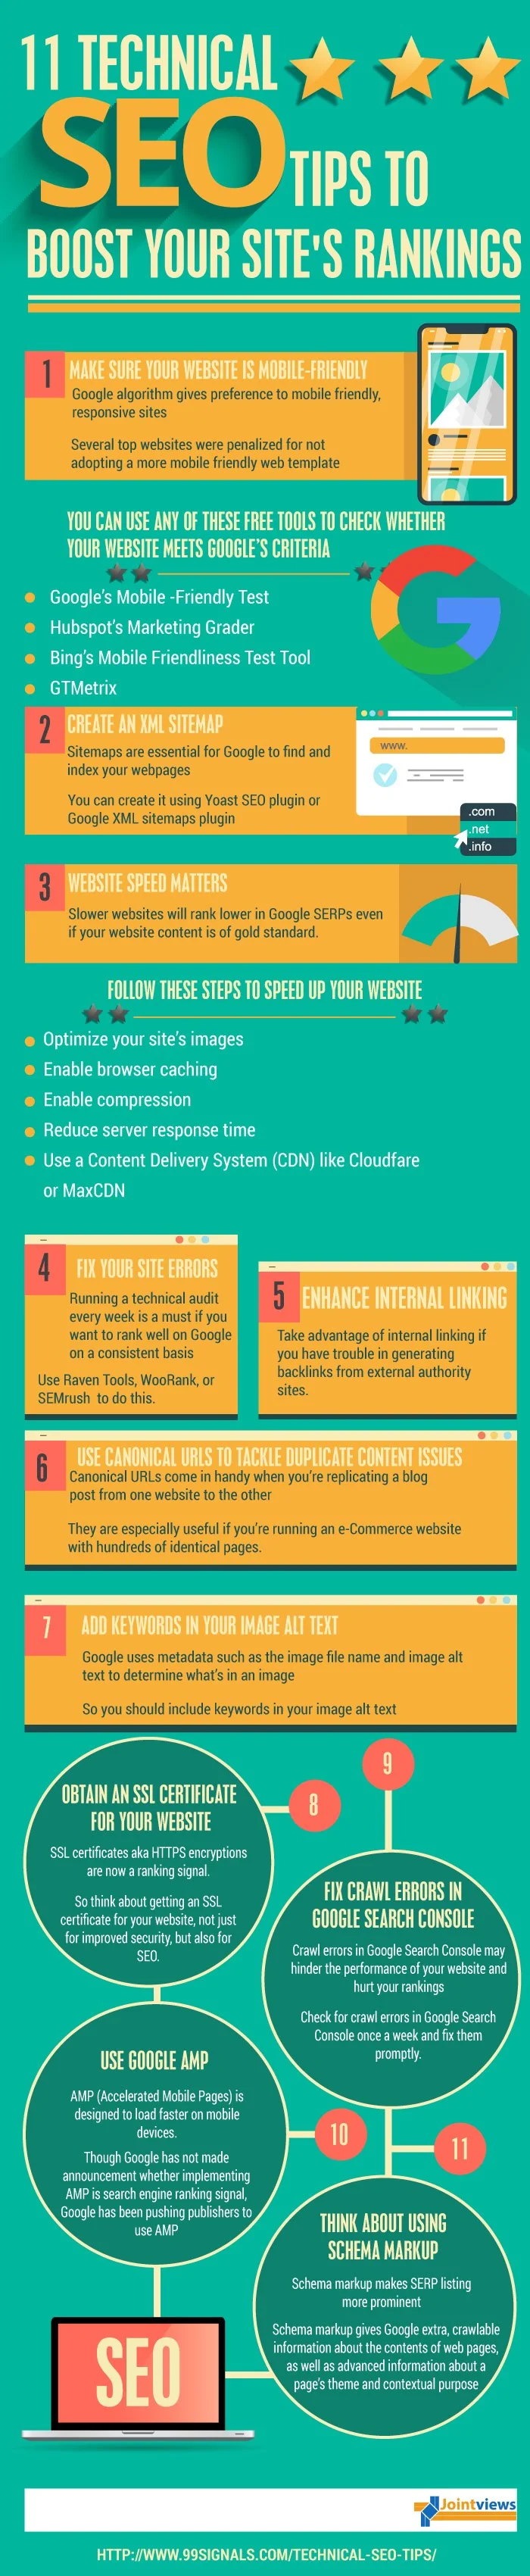 11 Technical SEO Tips to Boost Your Site’s Rankings - #Infographic